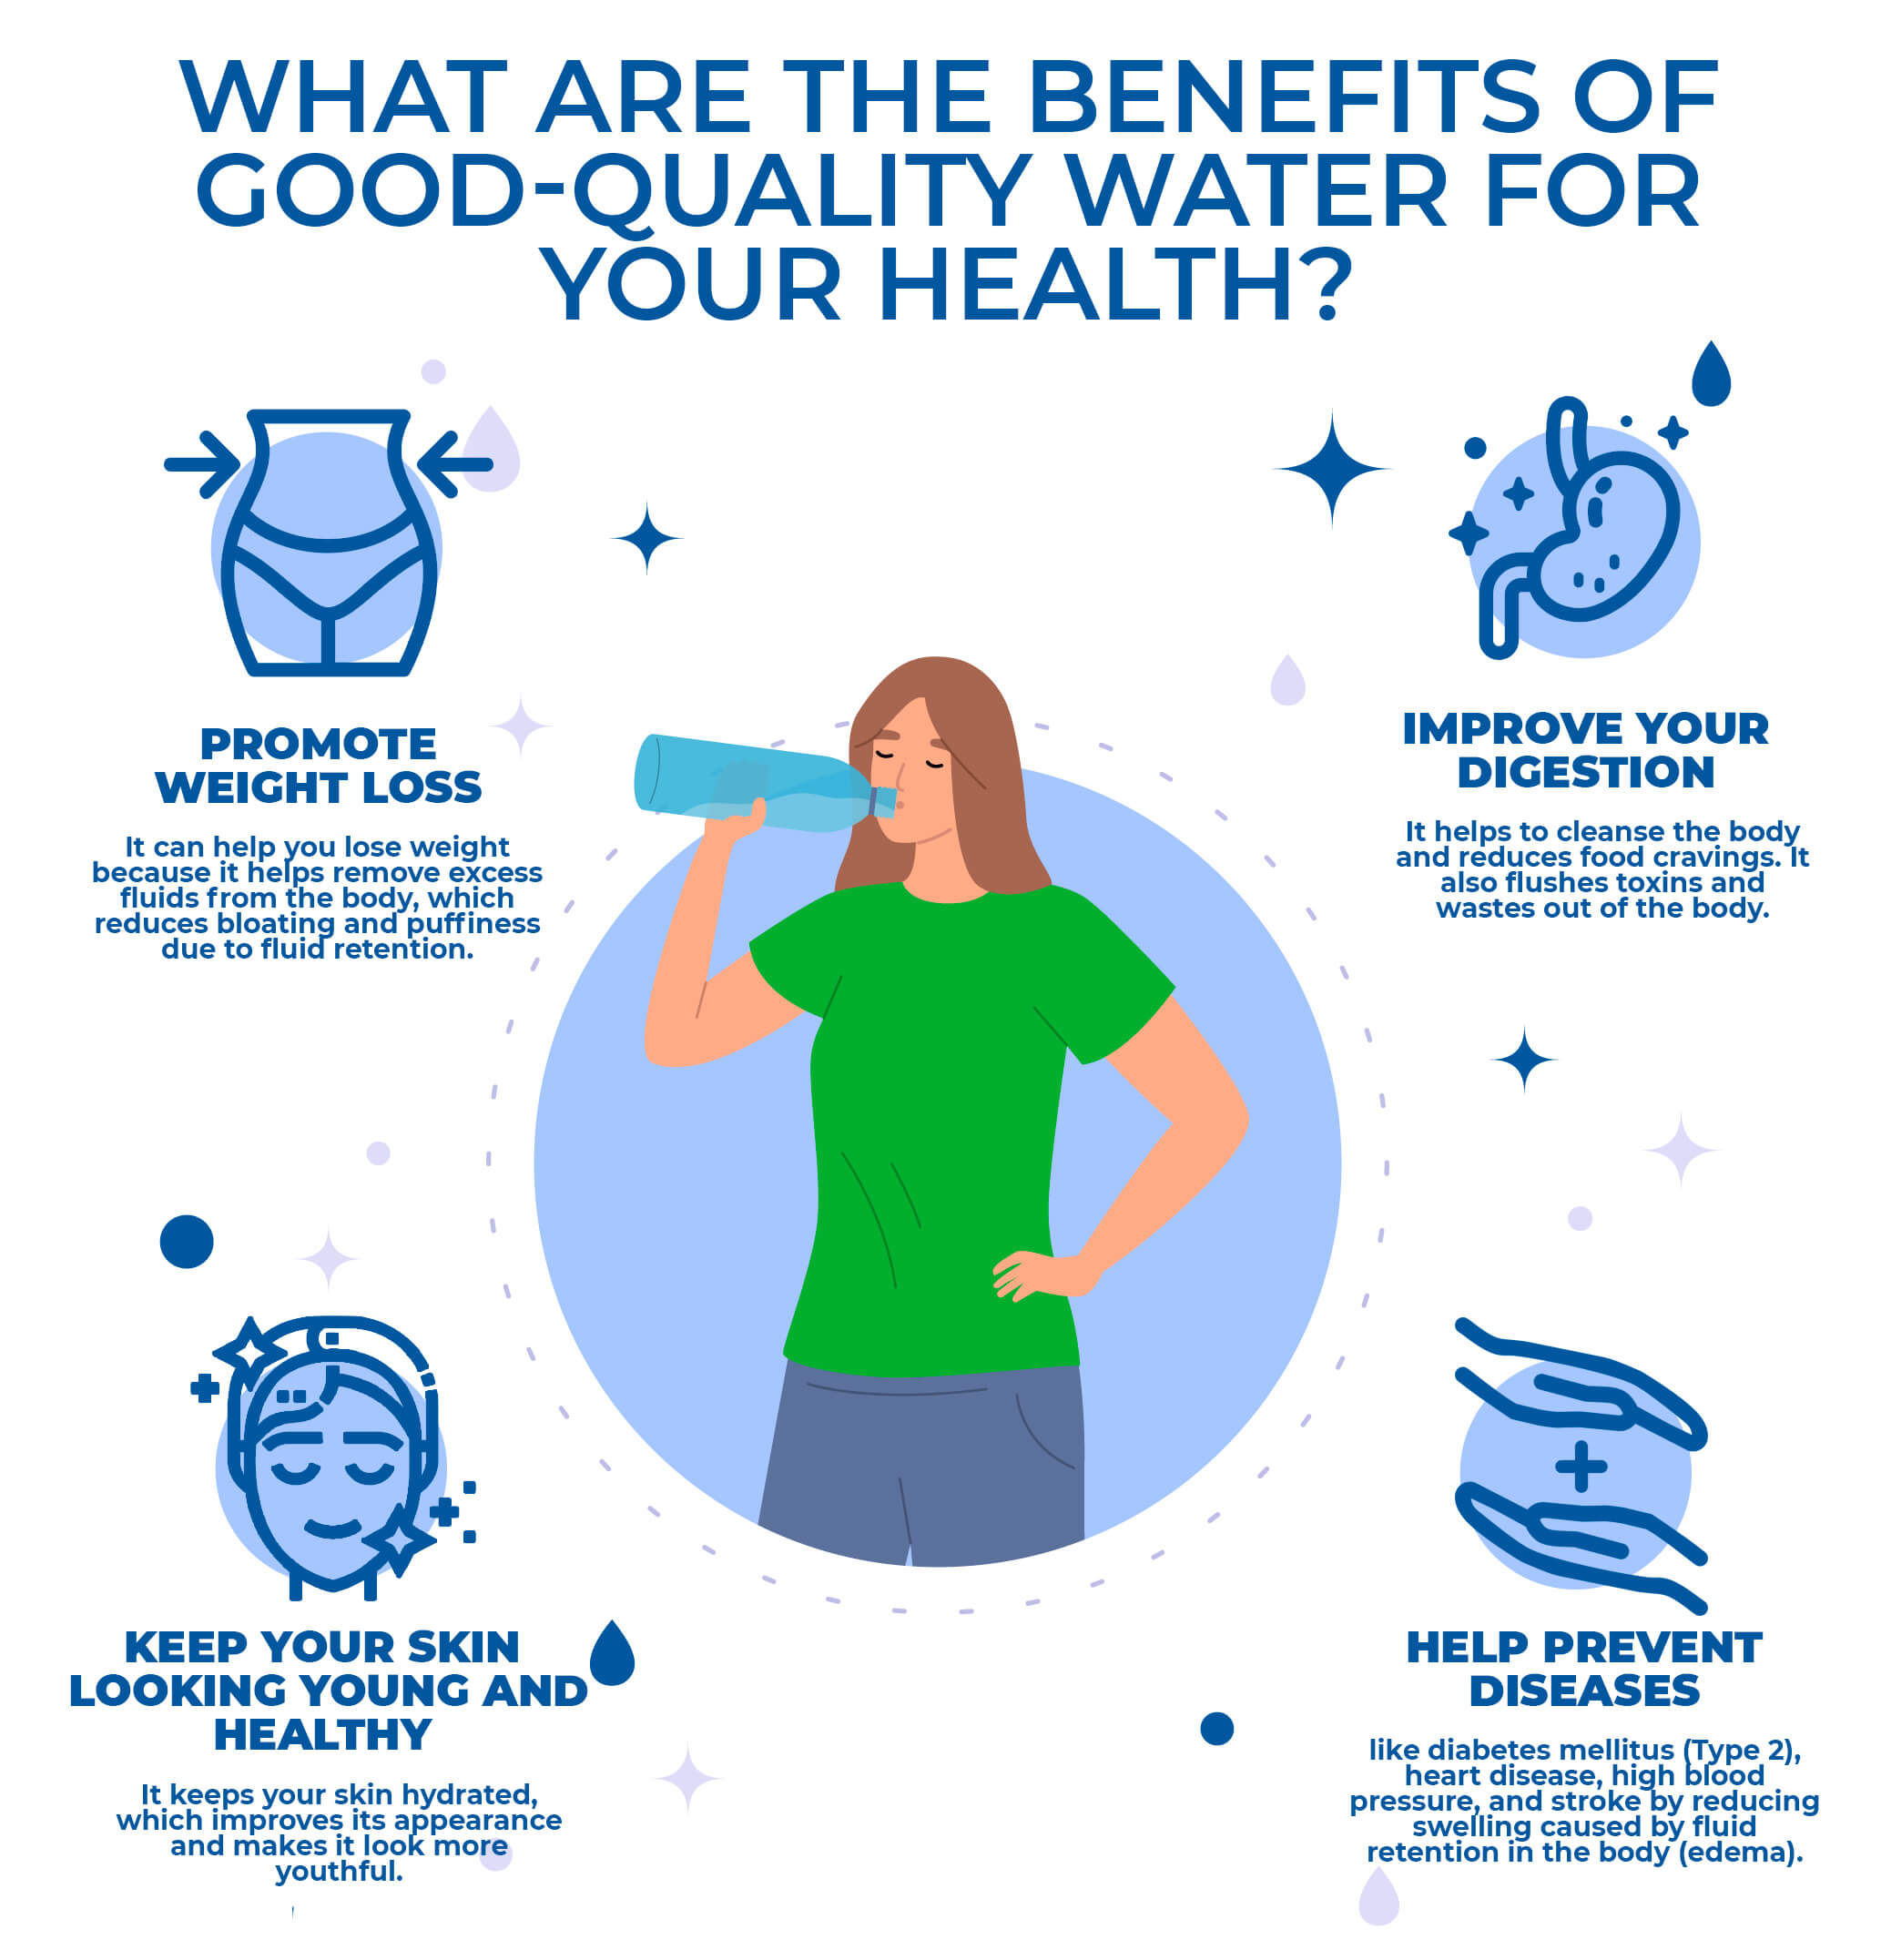 What are the benefits of good-quality water for your health